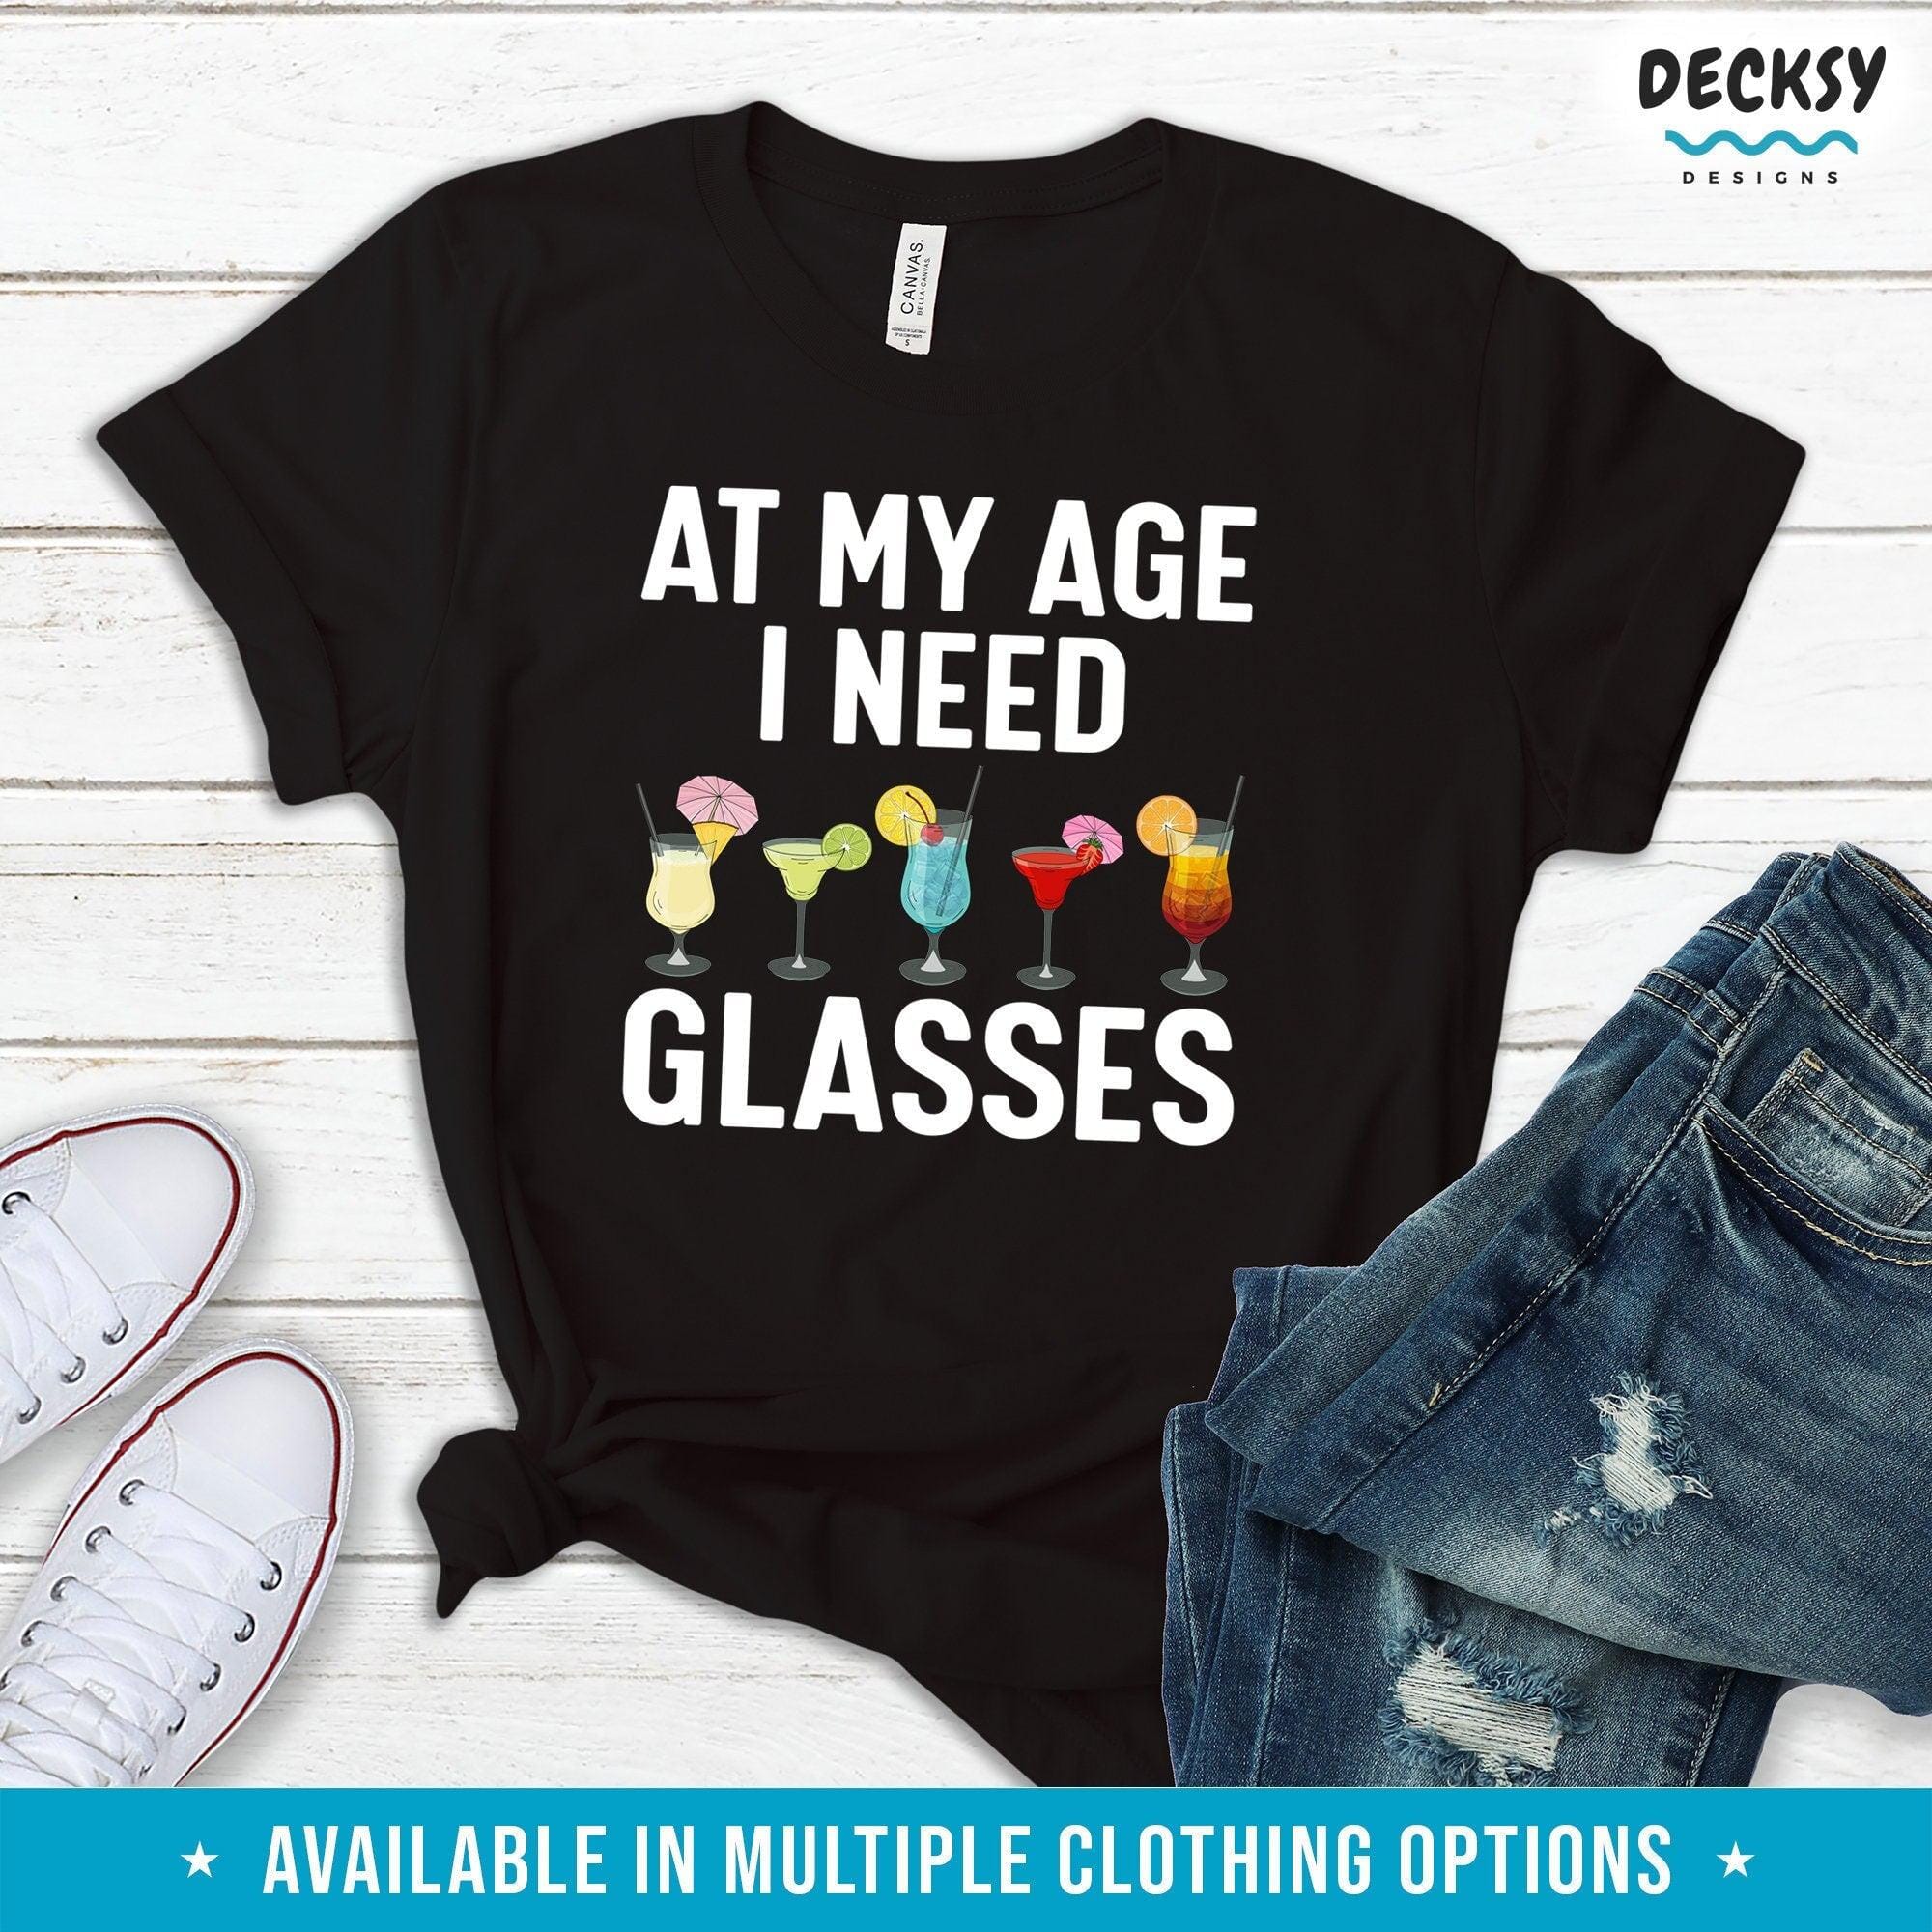 Drinking Shirt, I Need Glasses Birthday Gift-Clothing:Gender-Neutral Adult Clothing:Tops & Tees:T-shirts:Graphic Tees-DecksyDesigns